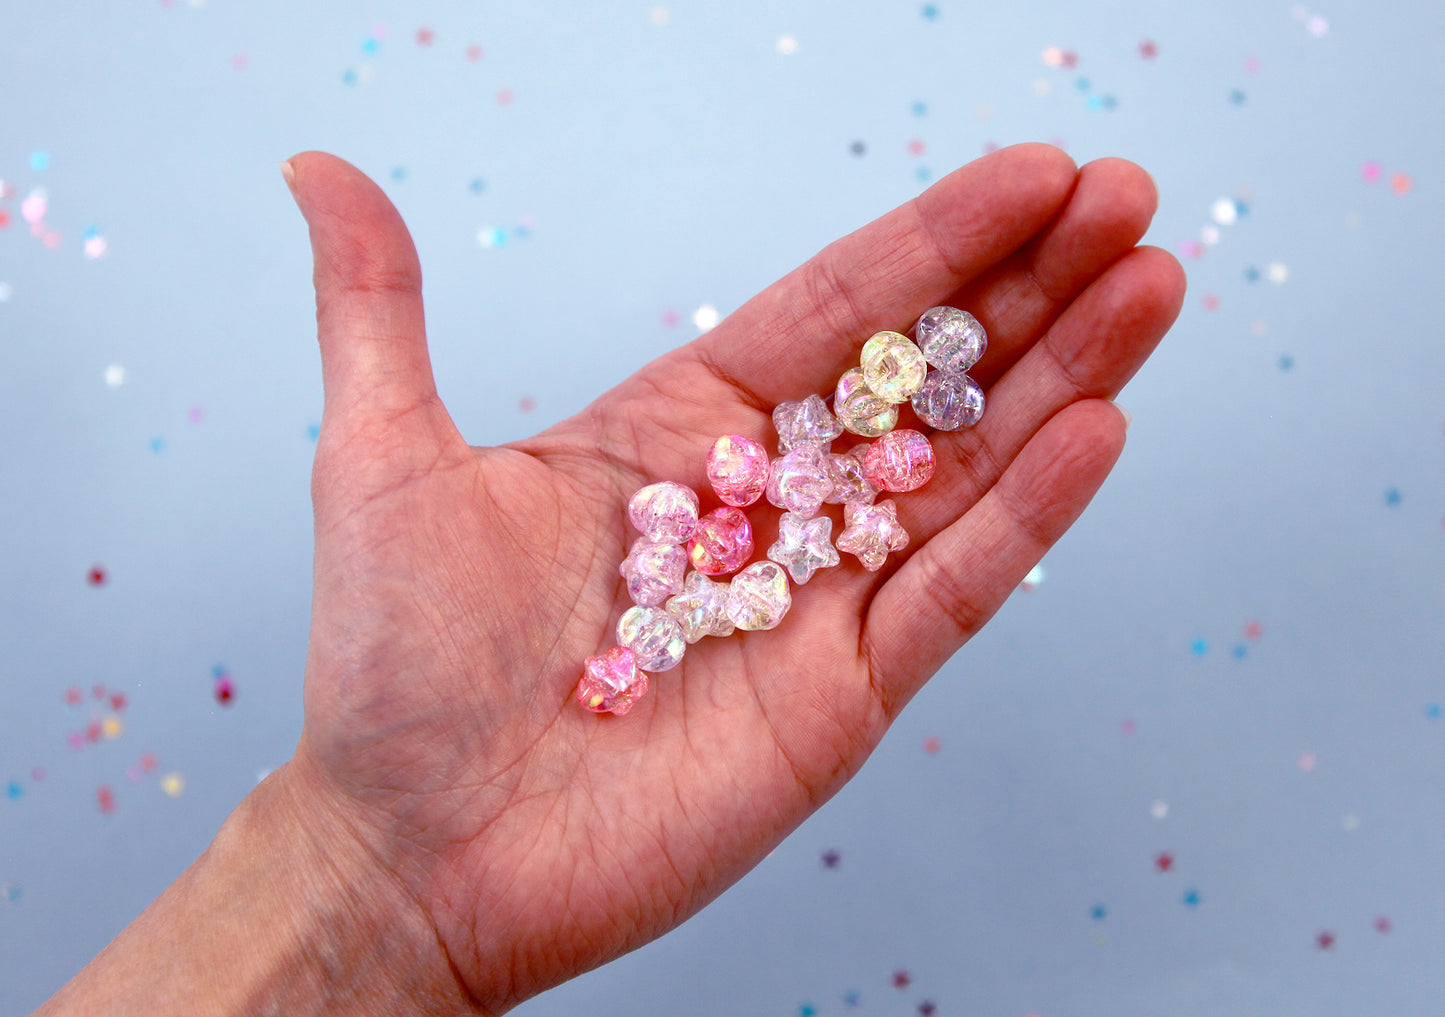 Cracked Pastel Star Beads - 12mm Pastel AB Crackle 3D Acrylic Star Beads - Resin Star Beads - 60 pc set